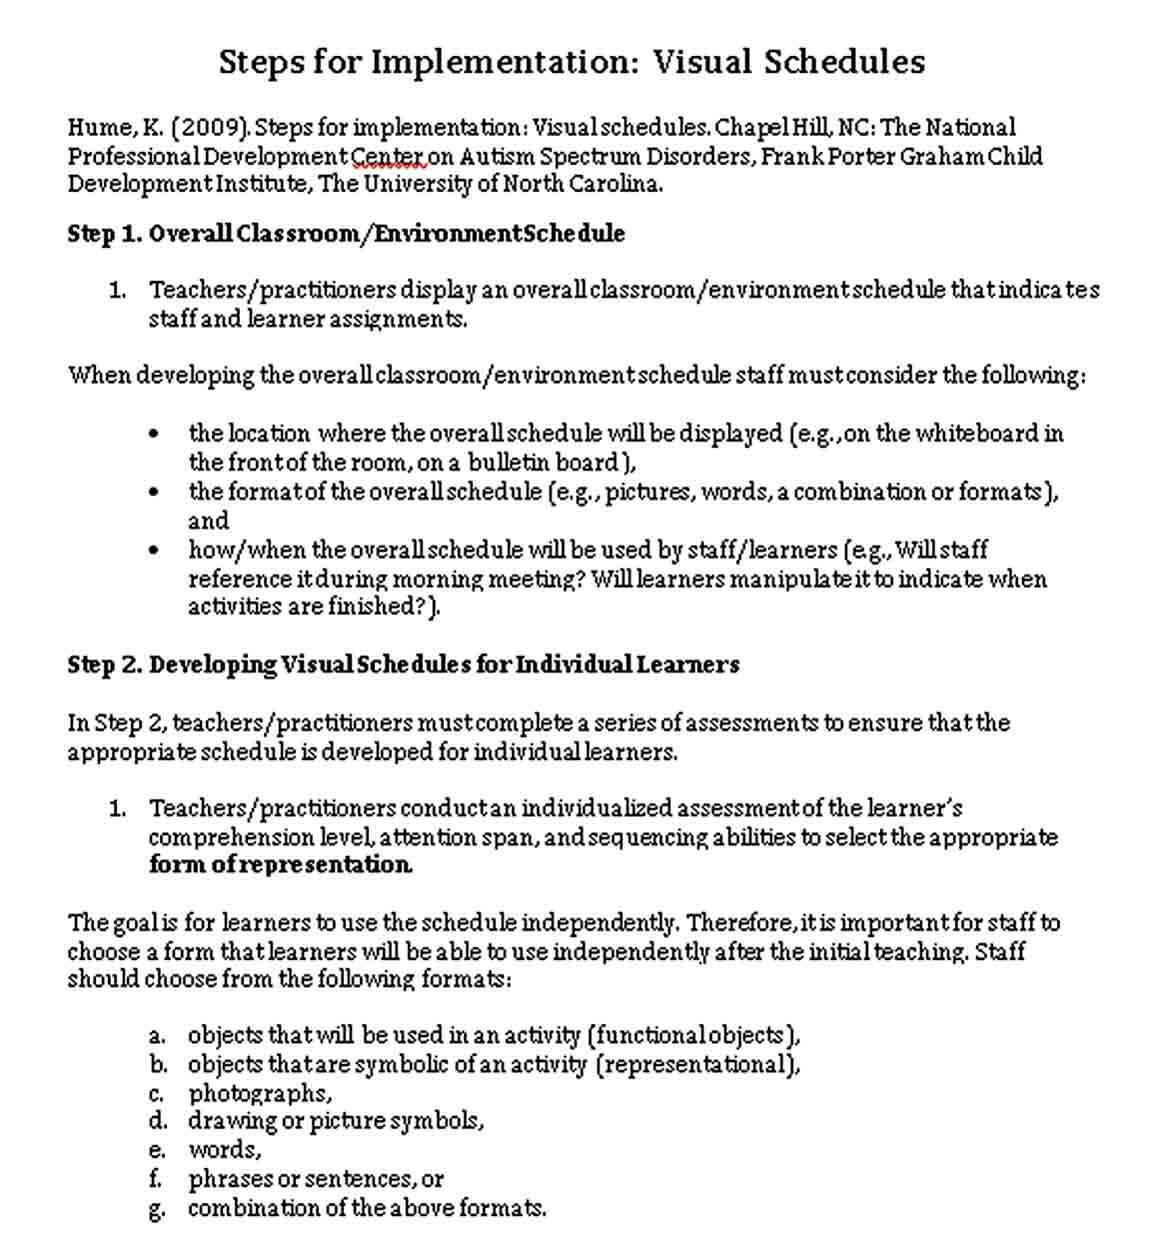 Visual Schedule Implementation Guide